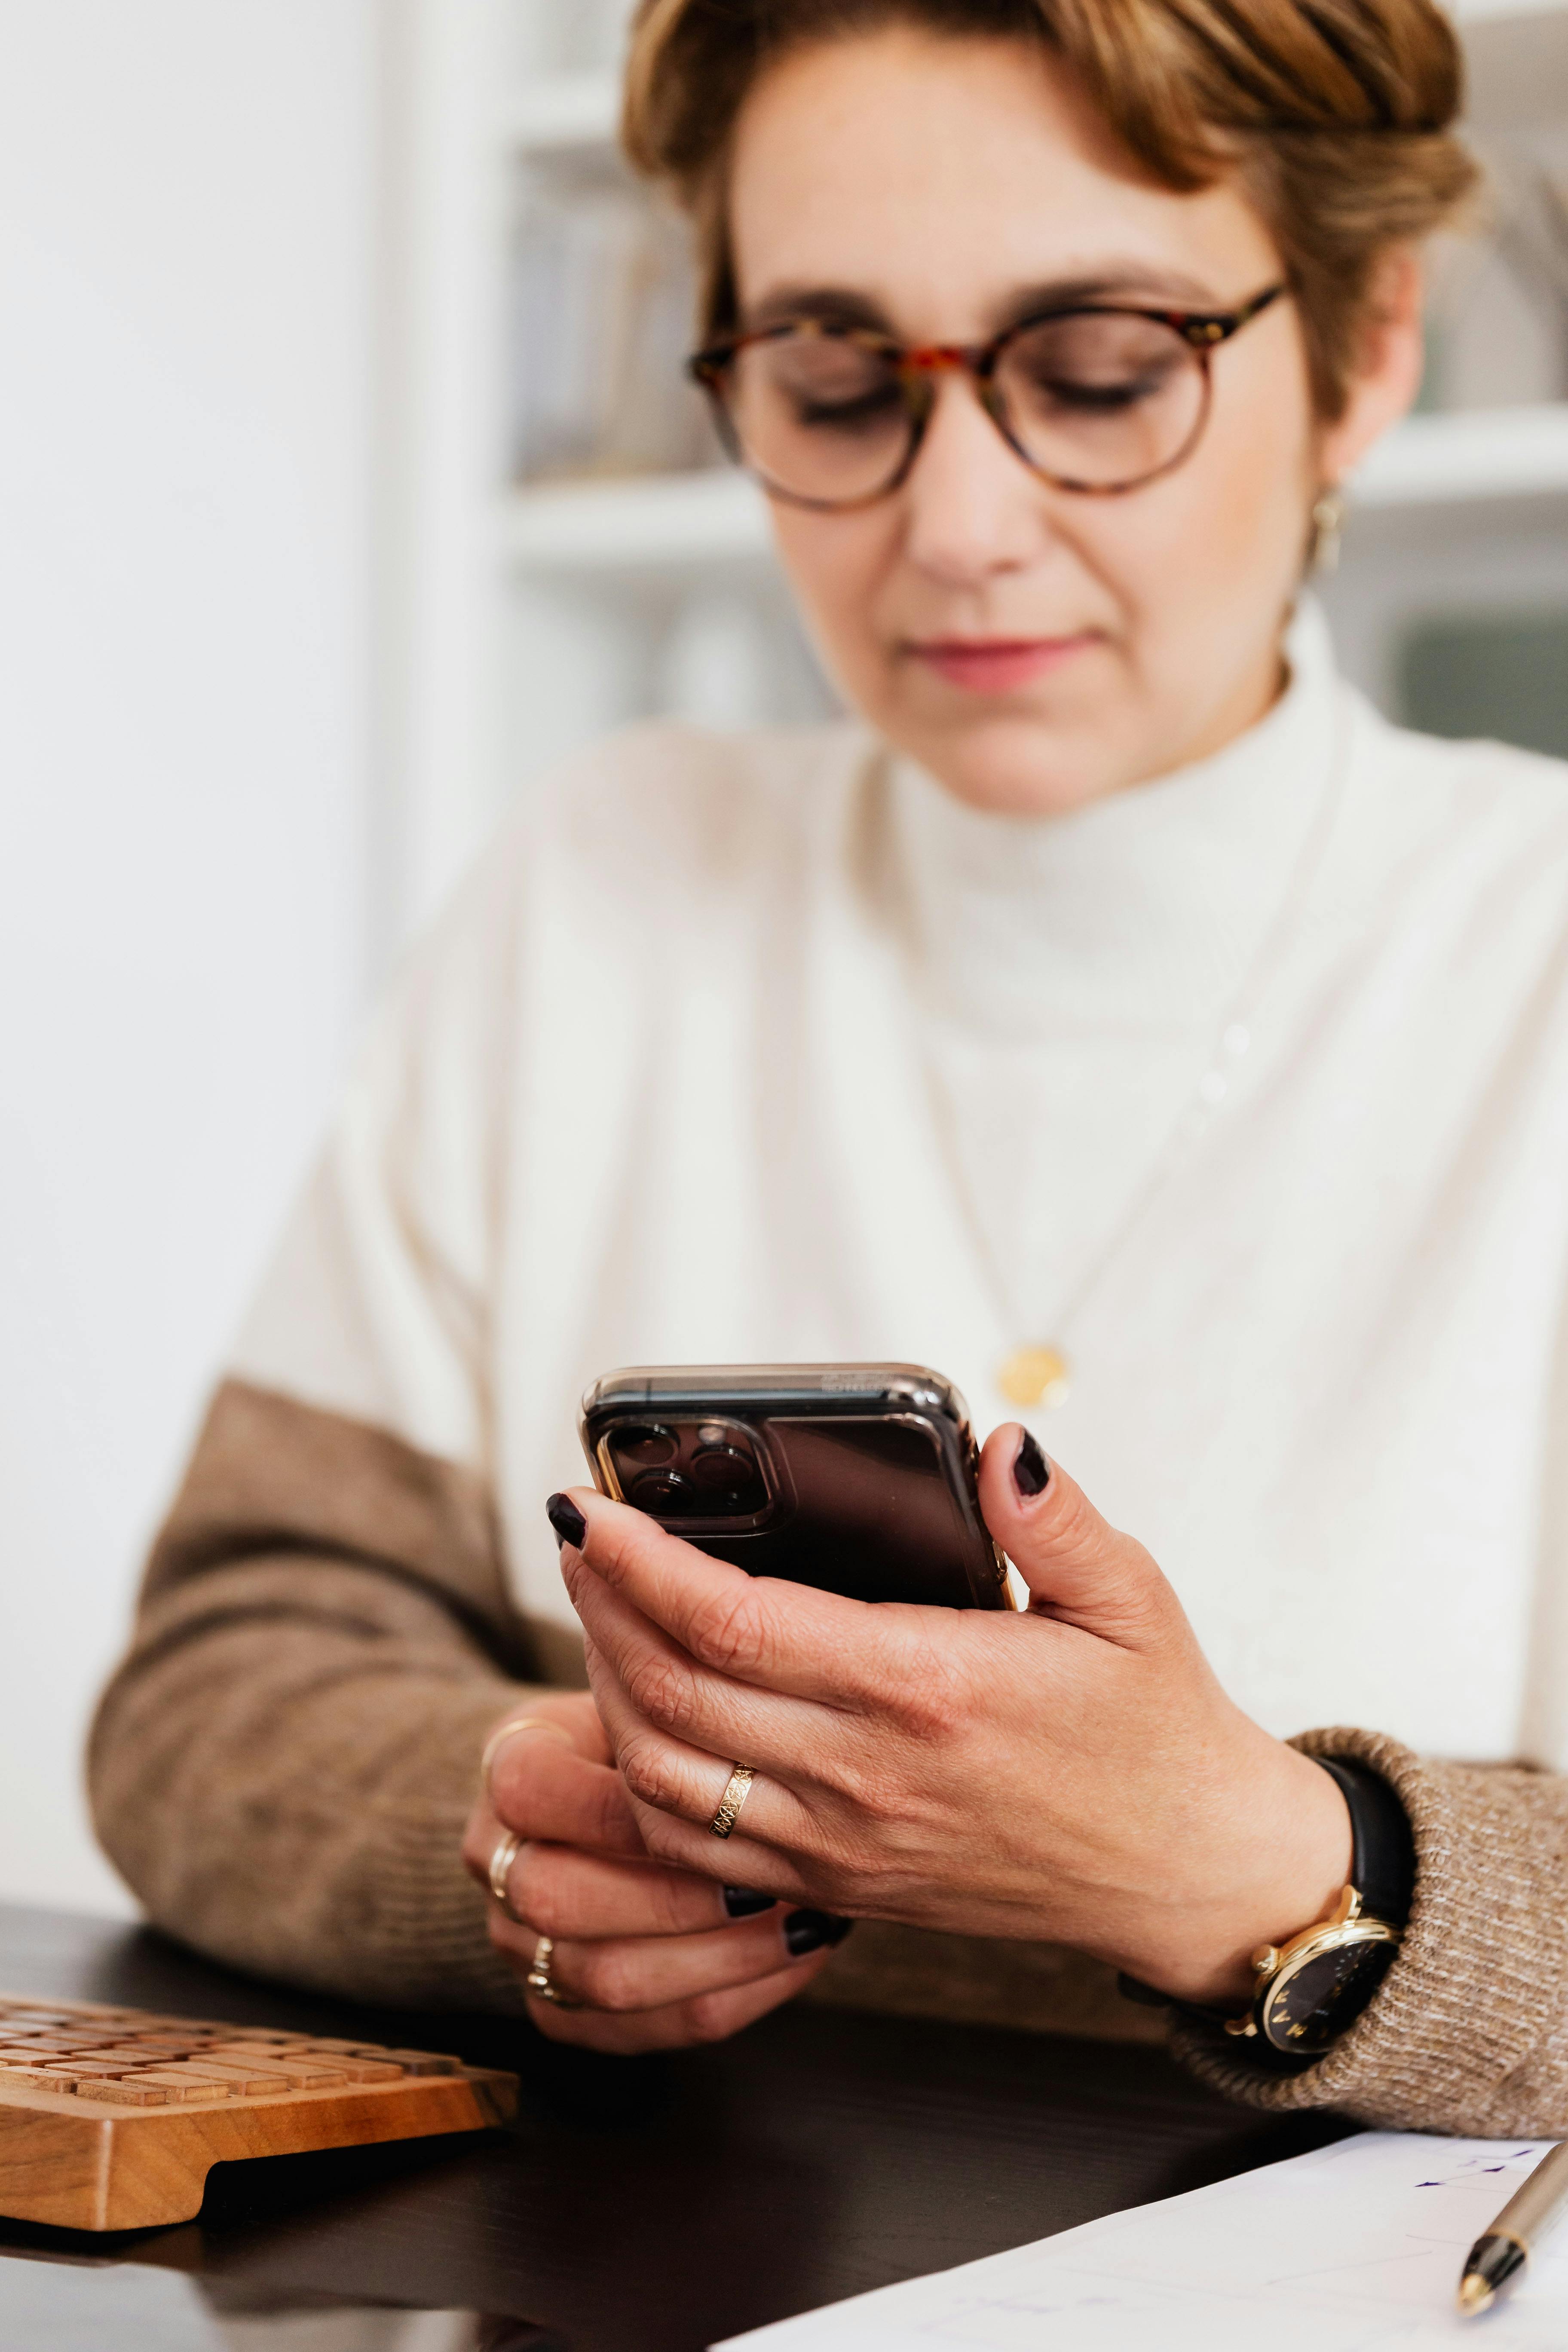 A woman reading messages on her smart phone | Source: Pexels